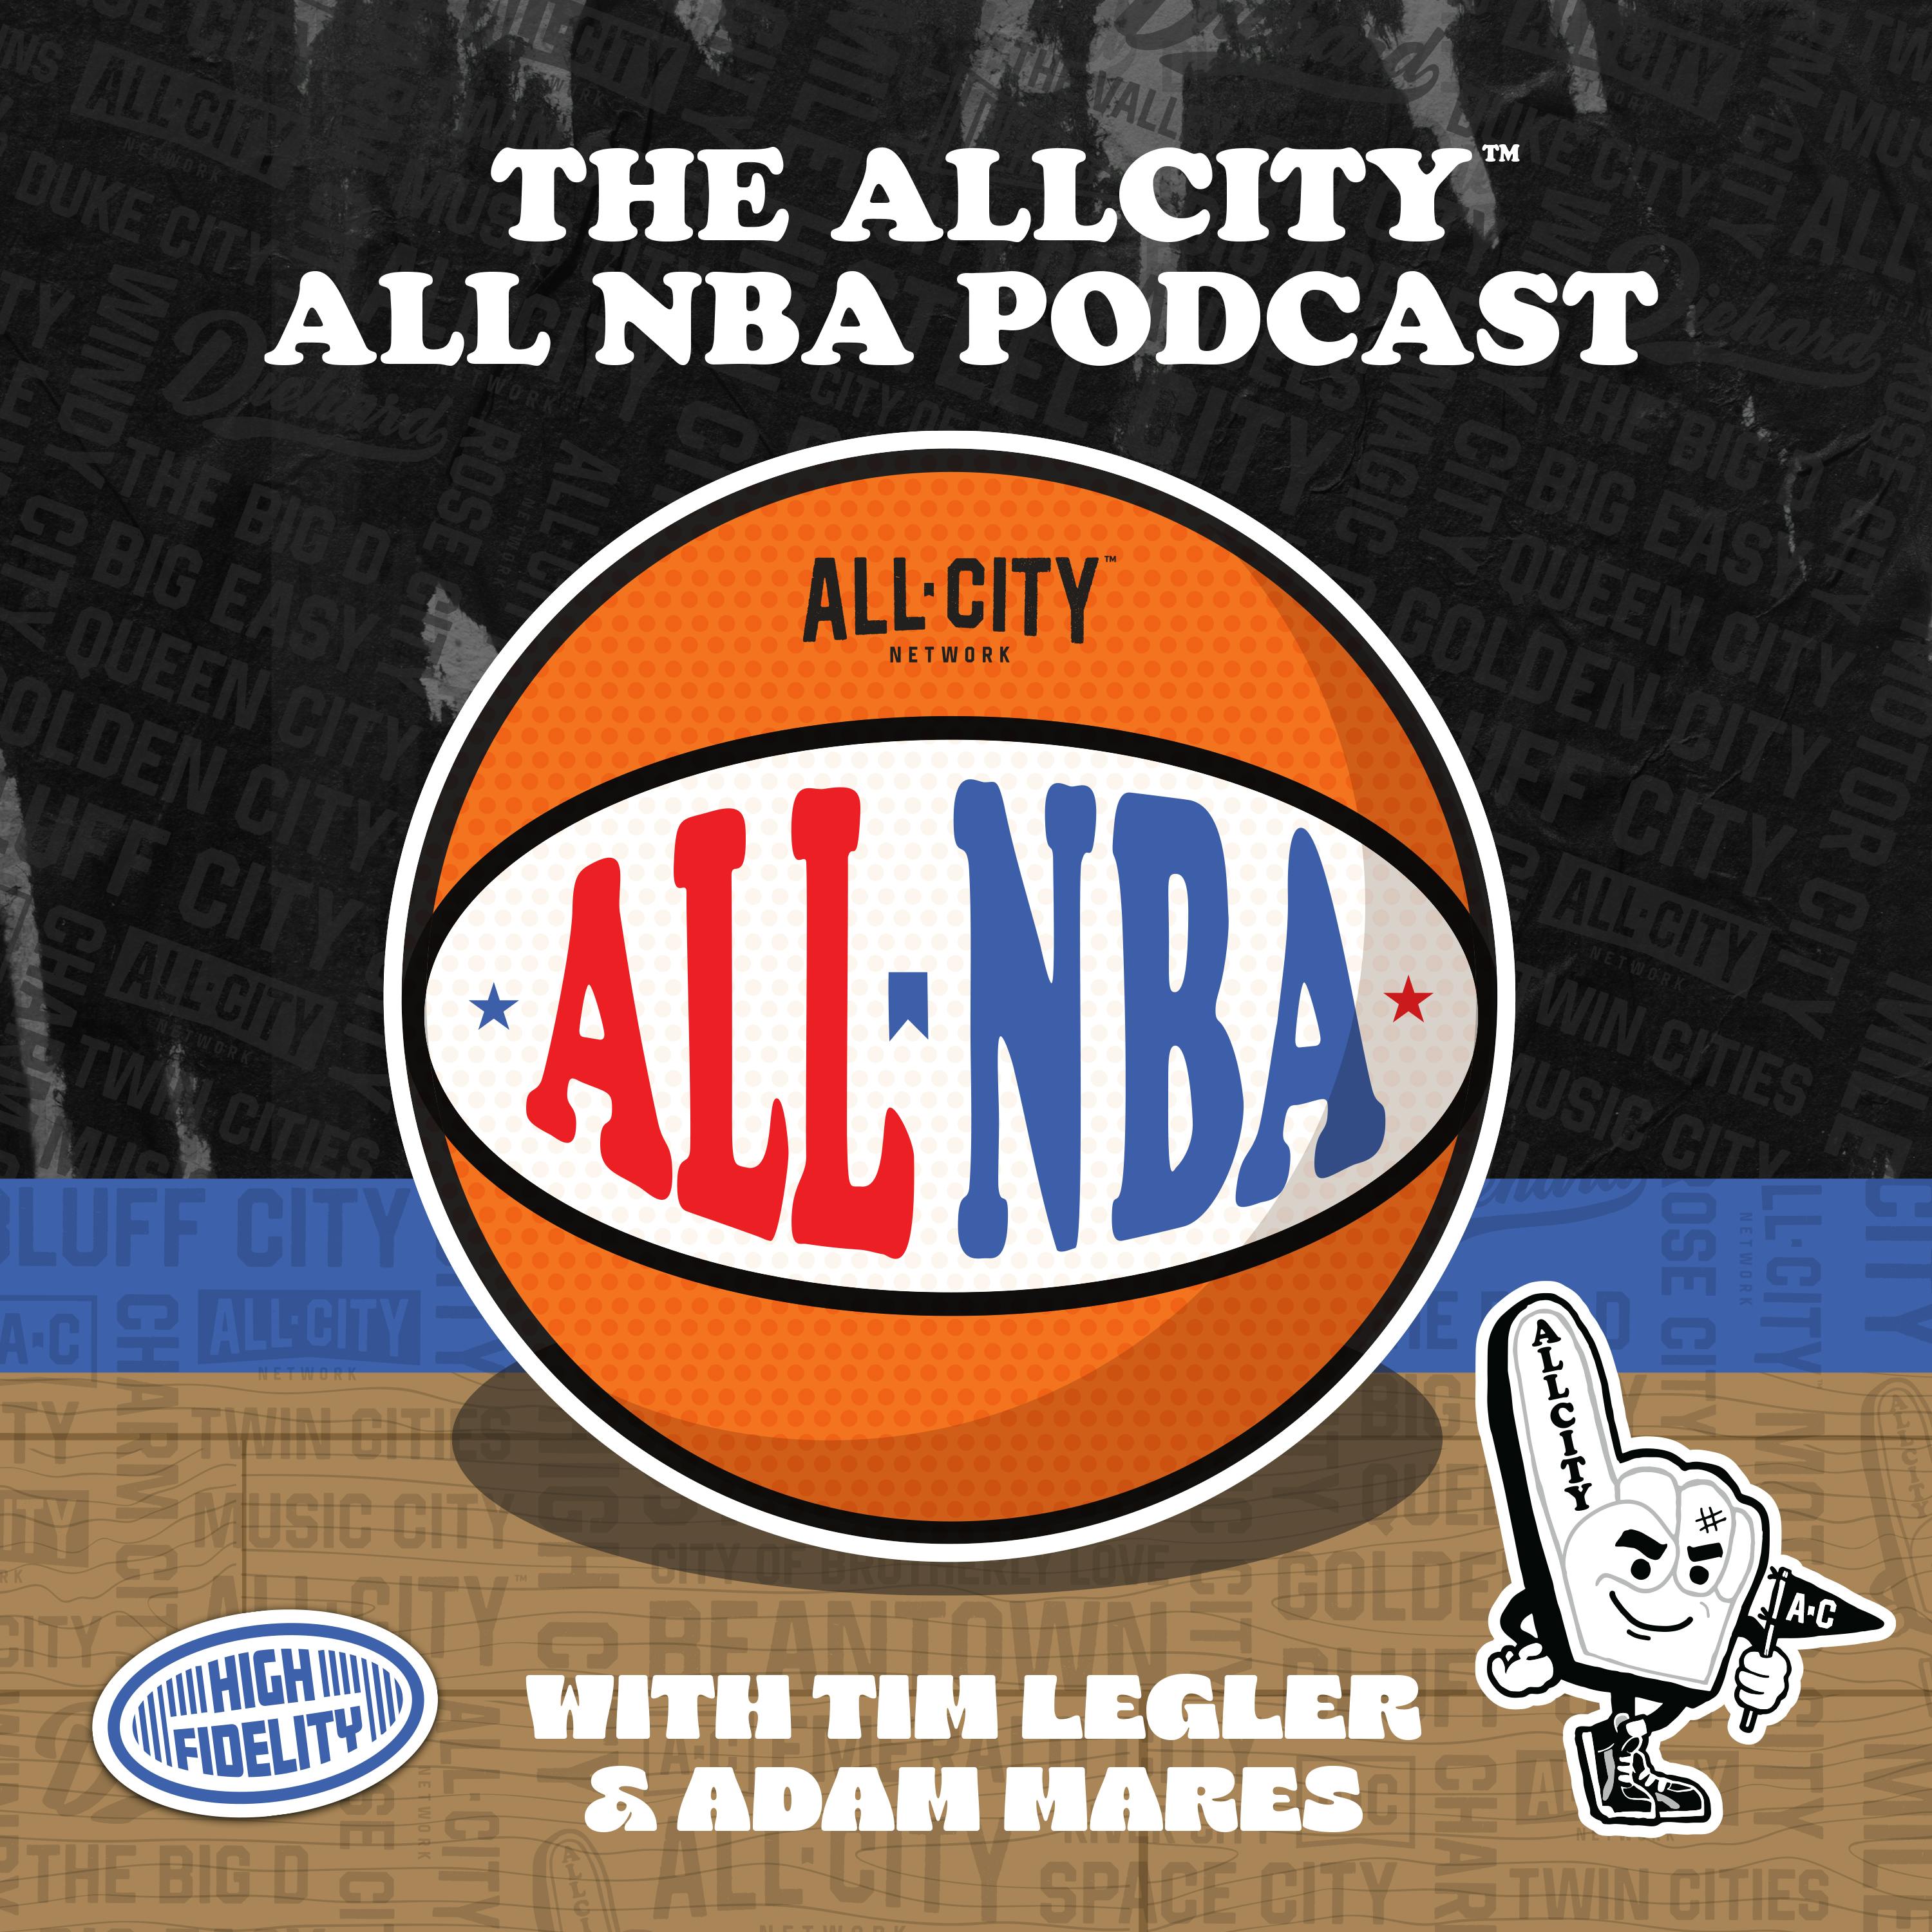 The ALL NBA Podcast: What we learned about Embiid and the 76ers in their play-in win over the Heat